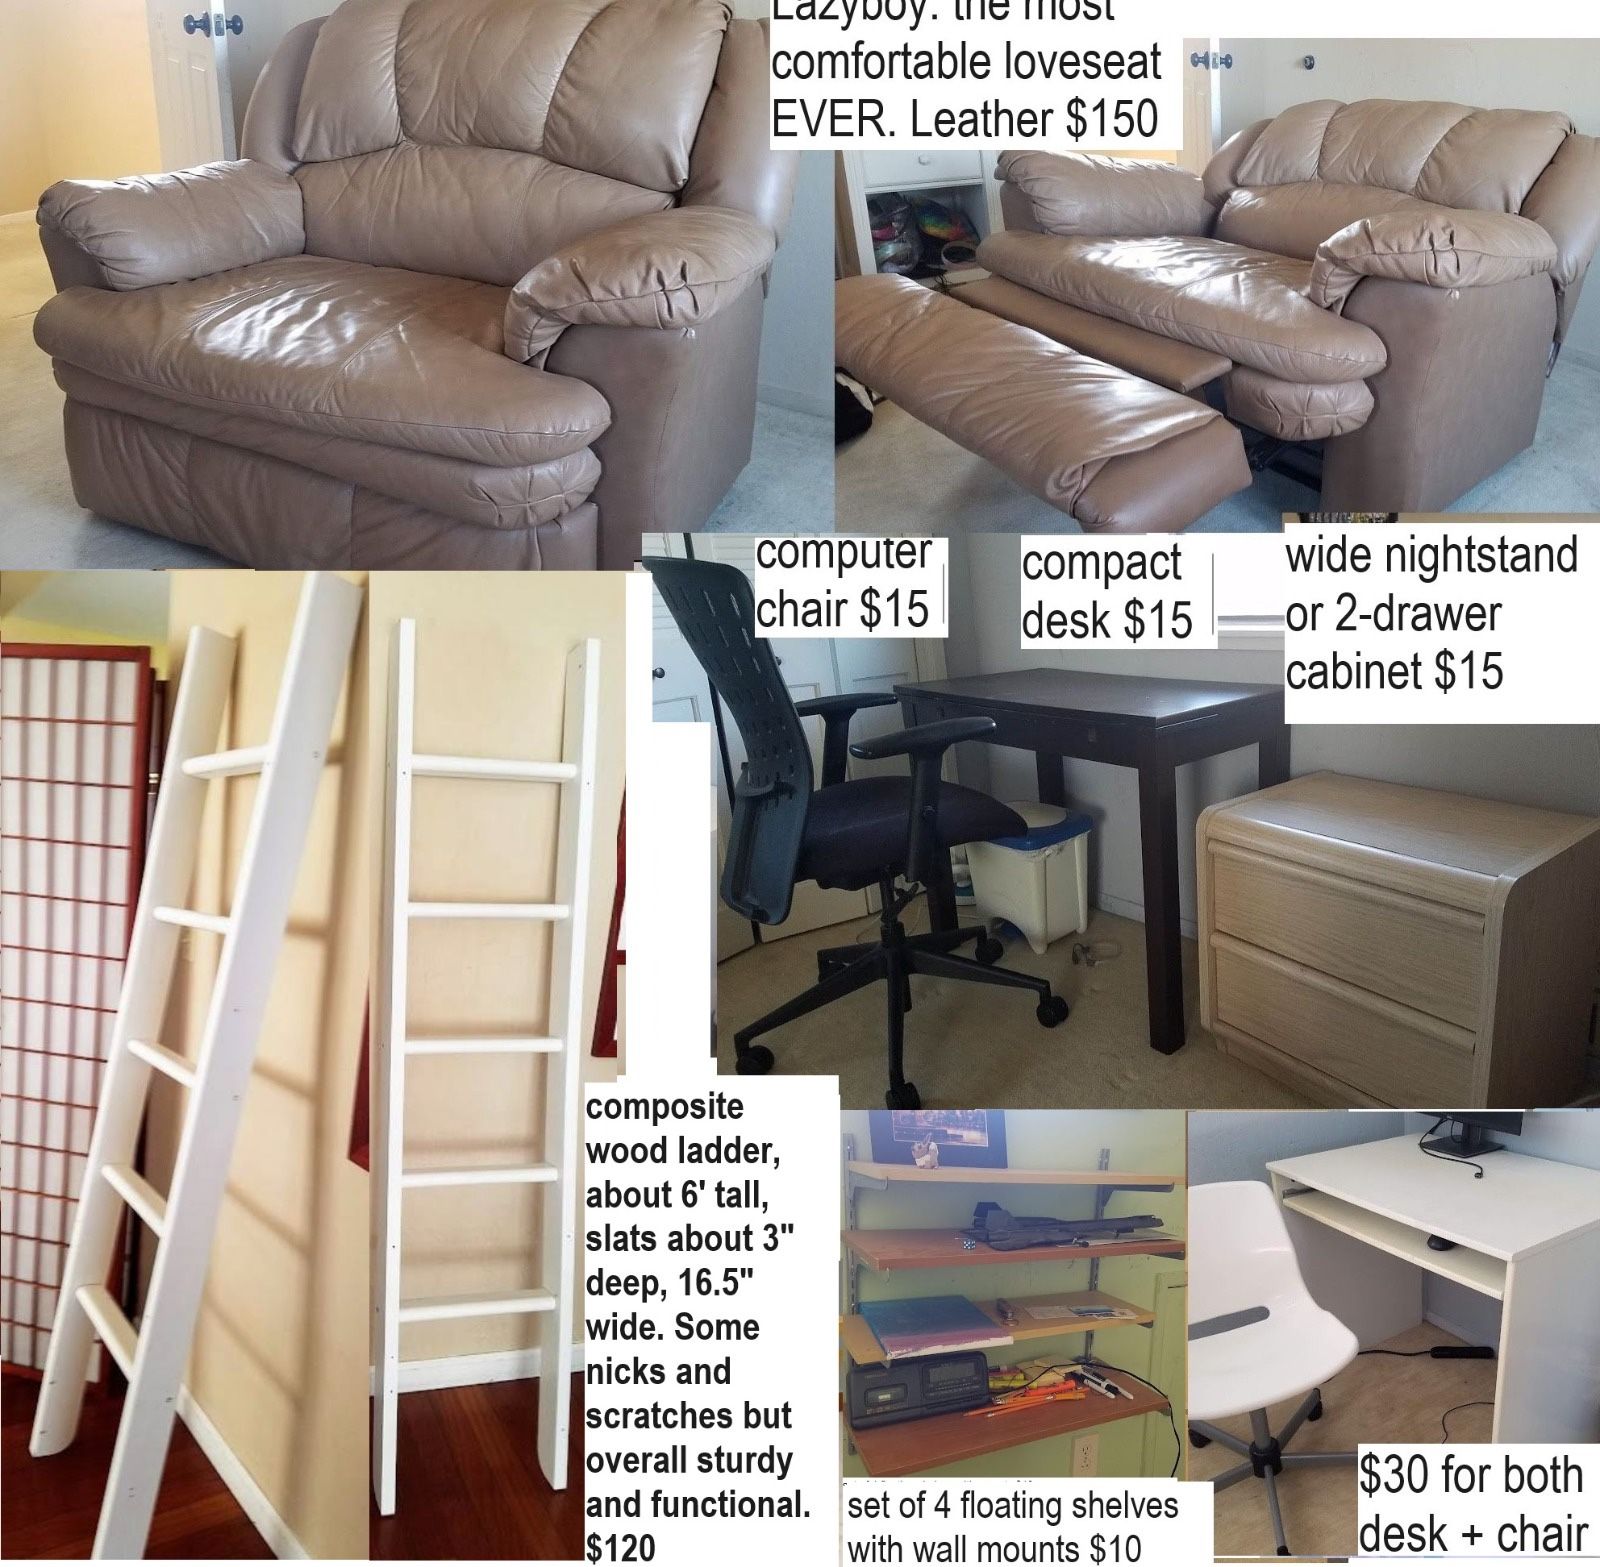 Lazyboy leather loveseat recliner chair, nightstands cabinets, small desk+chair, wall mount shelf